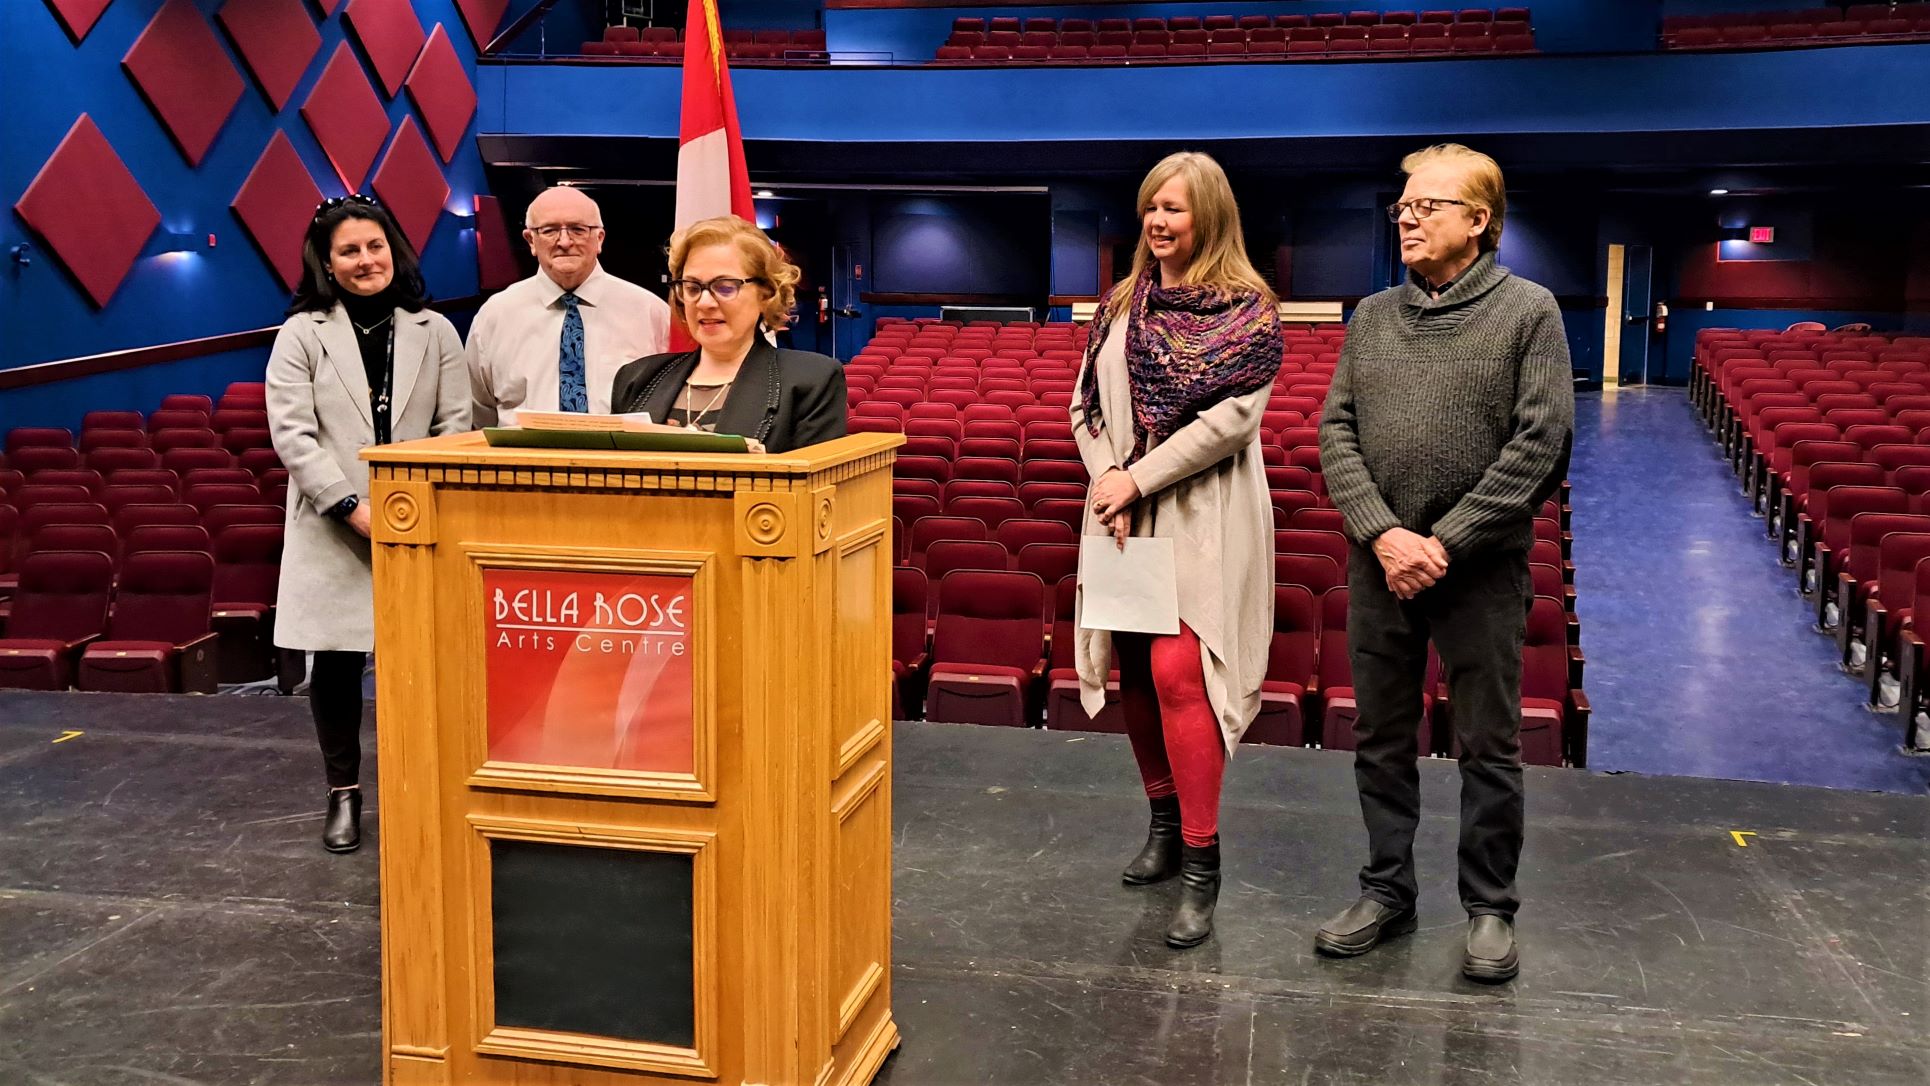 West Halifax MP Lena Metlege Diab announces funding for the Bella Rose Arts Centre Society as, from left, Lee Anne Amaral, Russell Walker, Amie Moore and Gary O’Hara listen. 